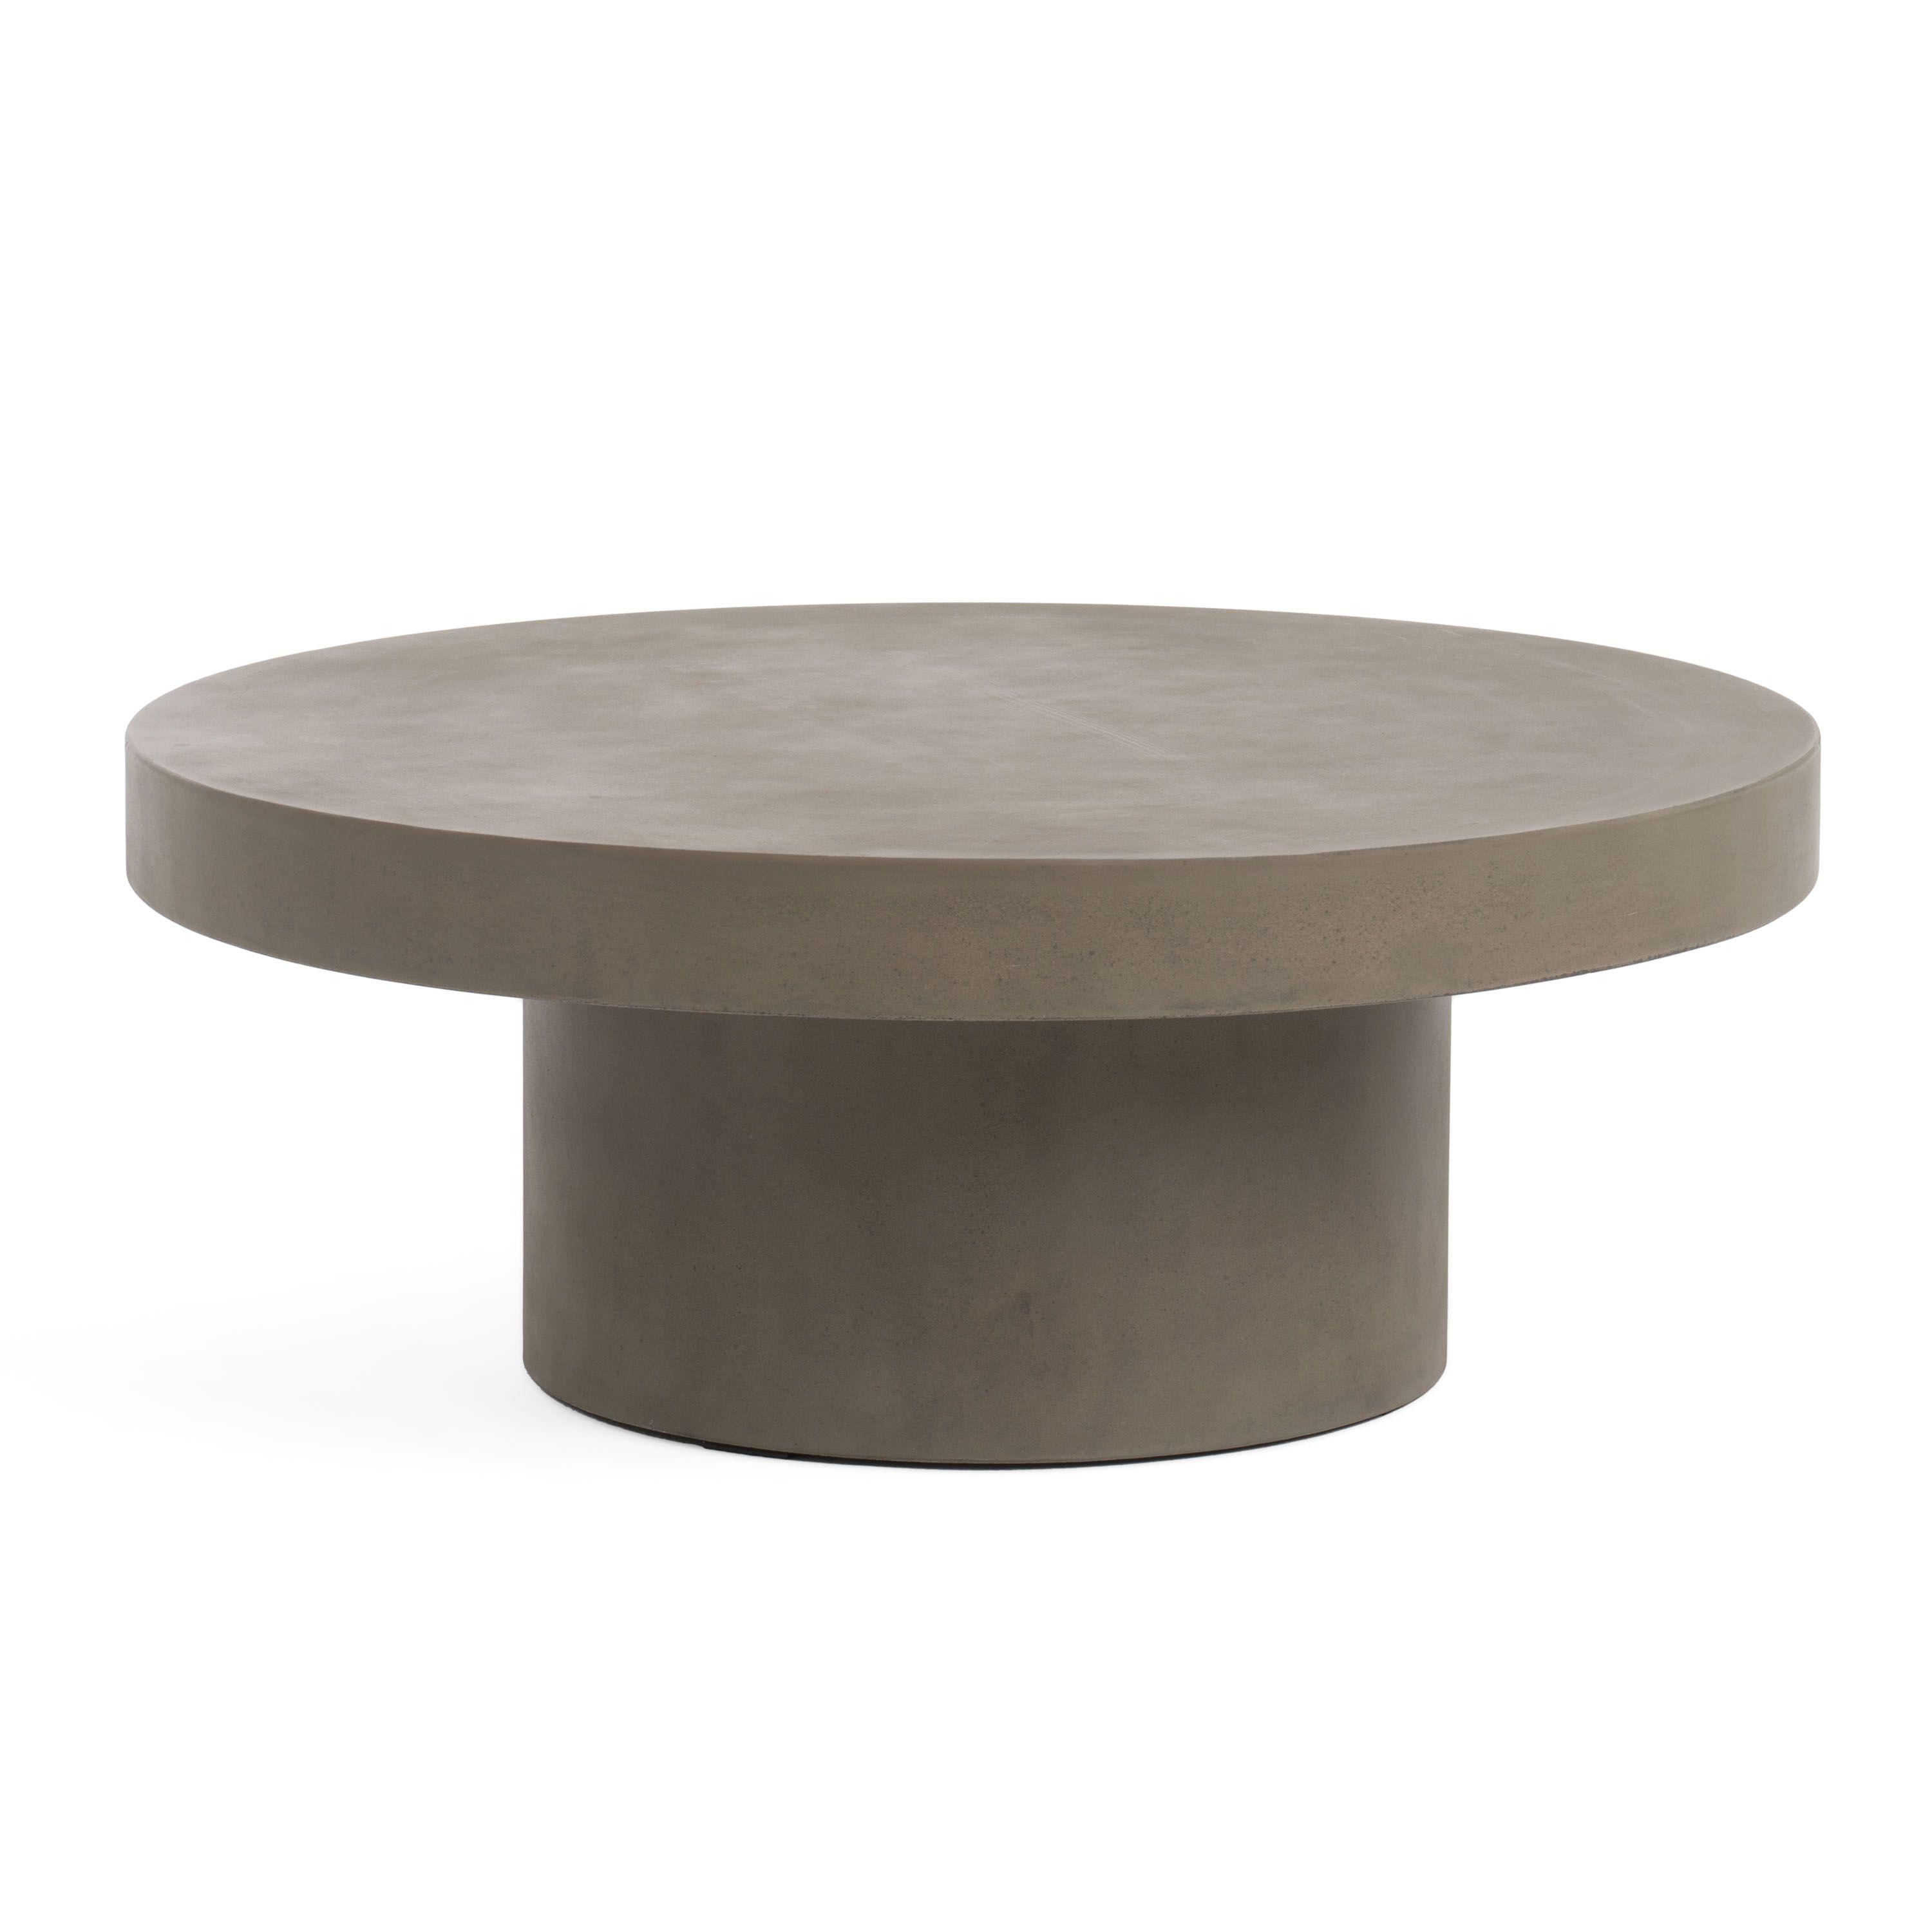 Modern Coffee Table Modrest Morley Round Coffee Table VGGR649992-RND VGGR649992-RND in Gray Fabric